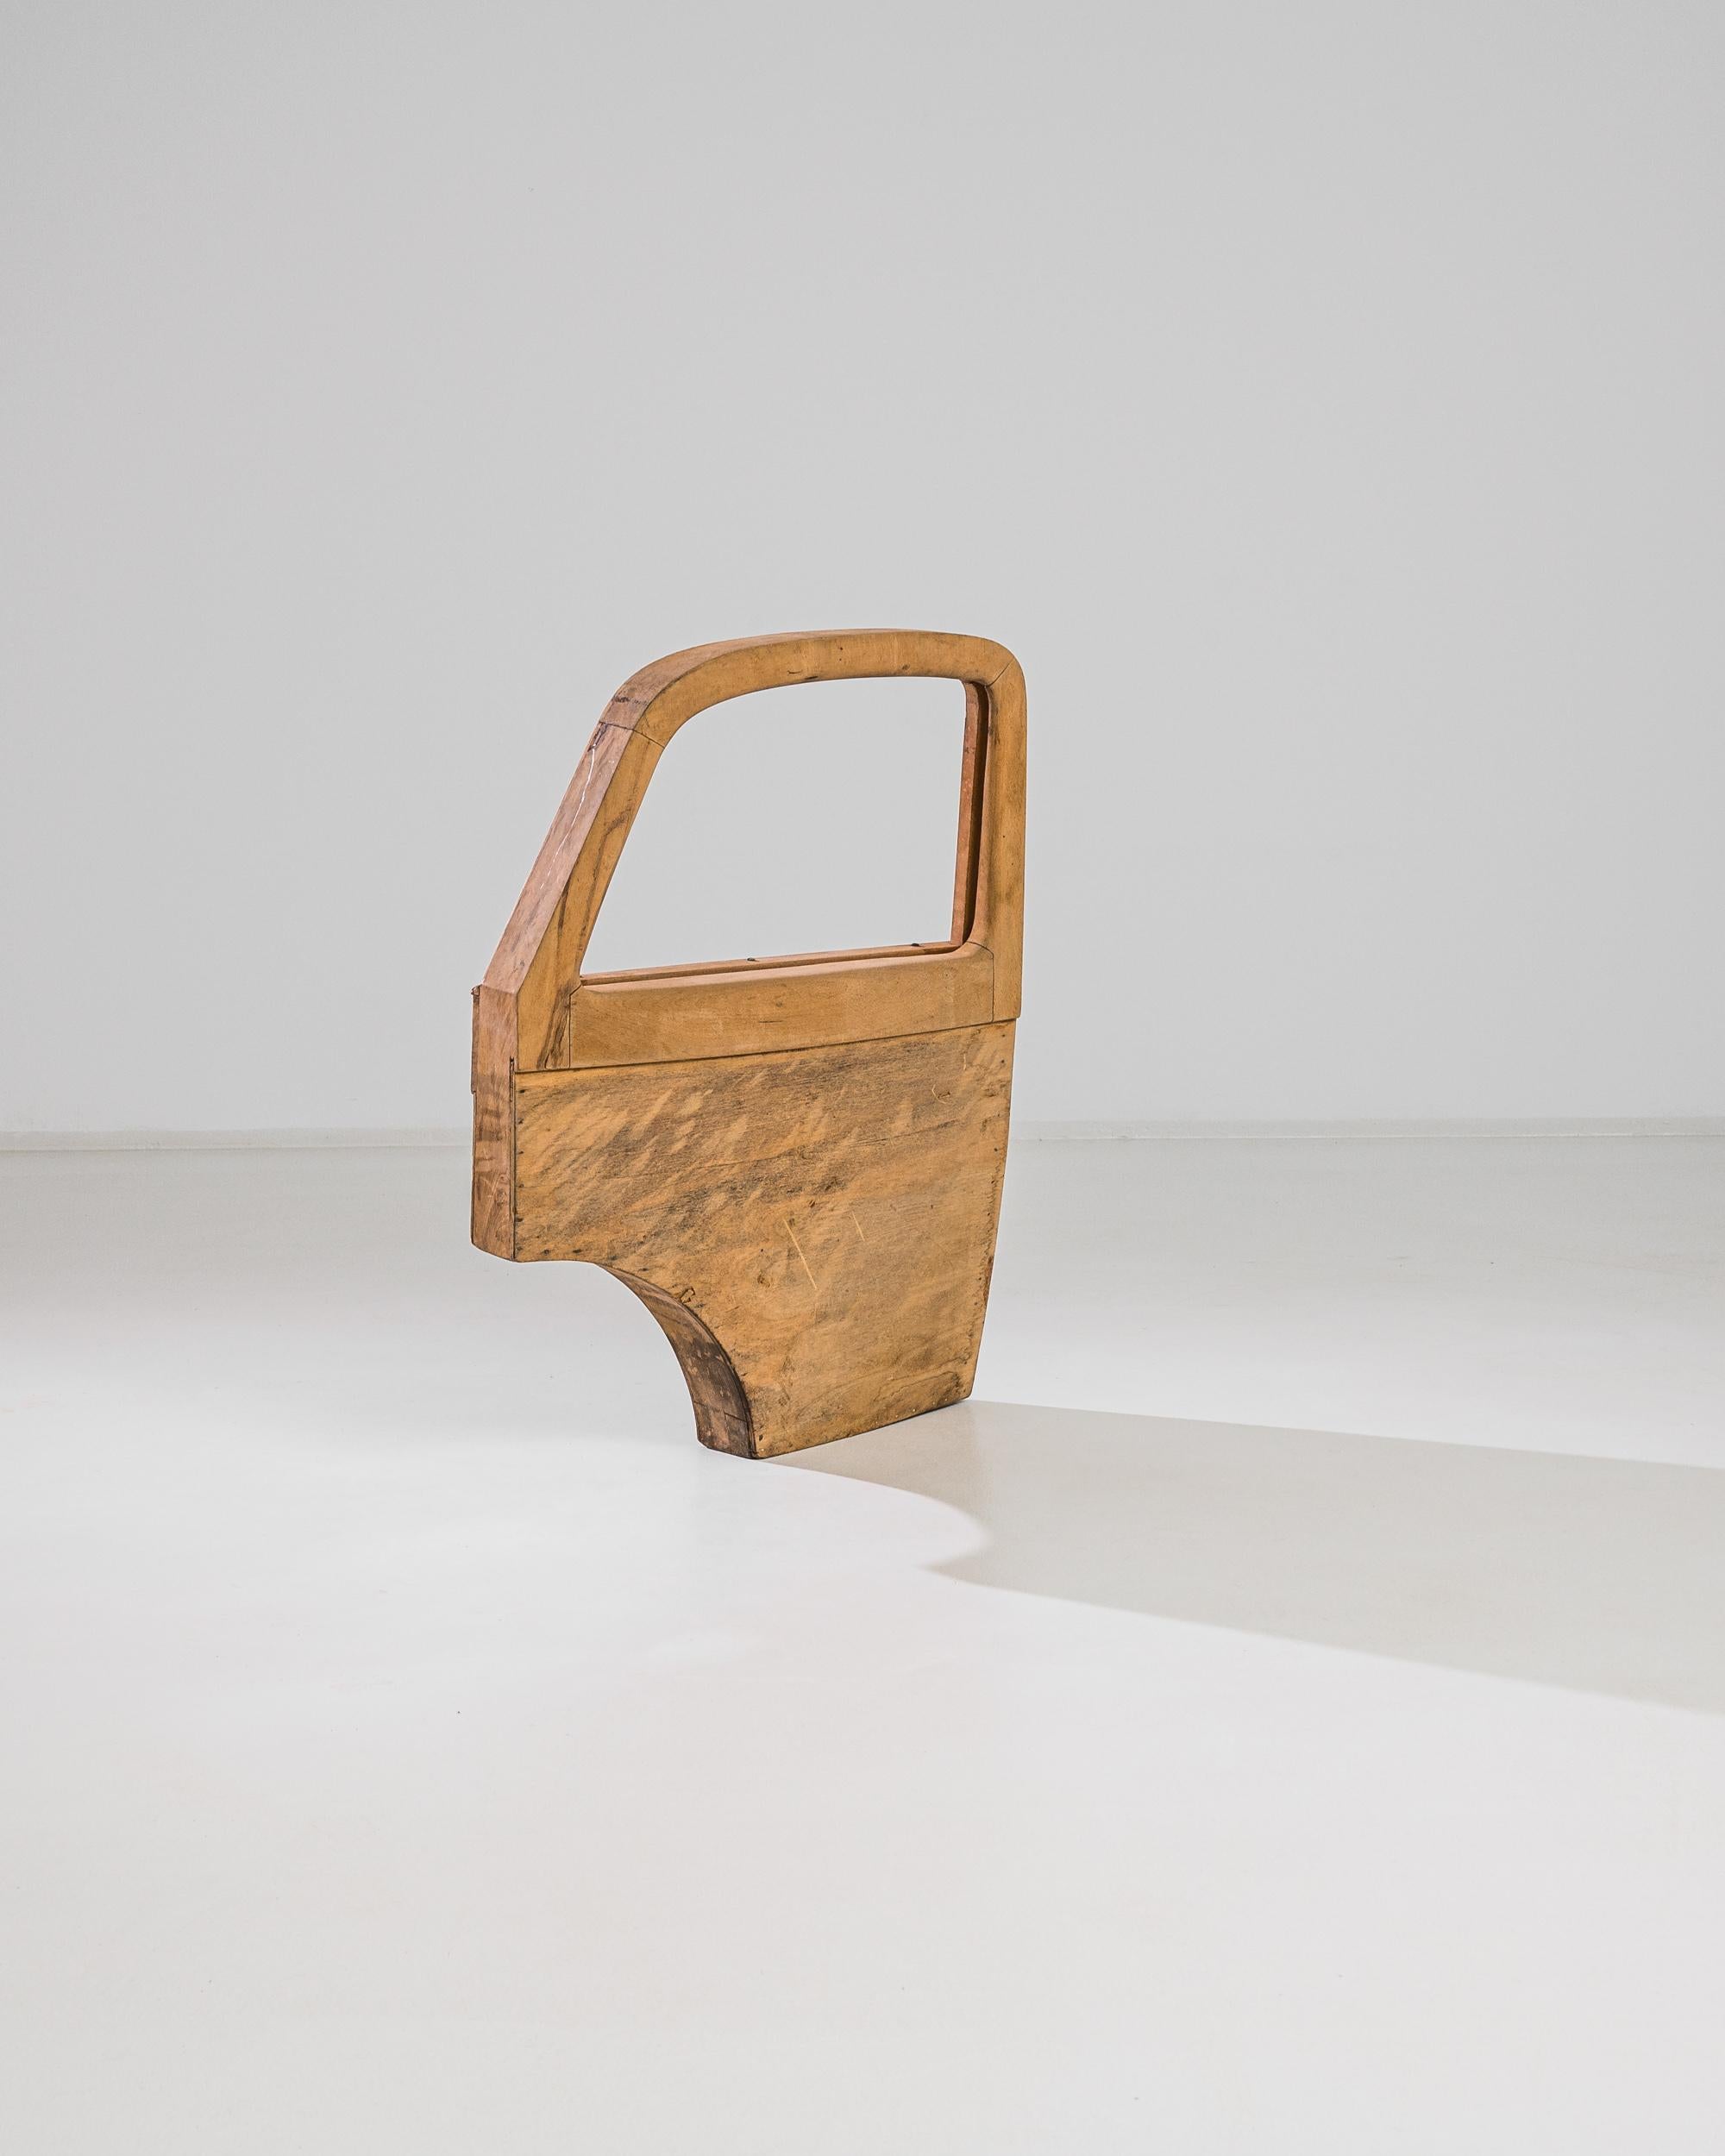 A decoration from 1950s France in solid beech and plywood. The graphic silhouette, reminiscent of the door of a vehicle, evokes the streamlined shapes of the golden age of car design. The open, window-like space creates a natural frame, accentuating